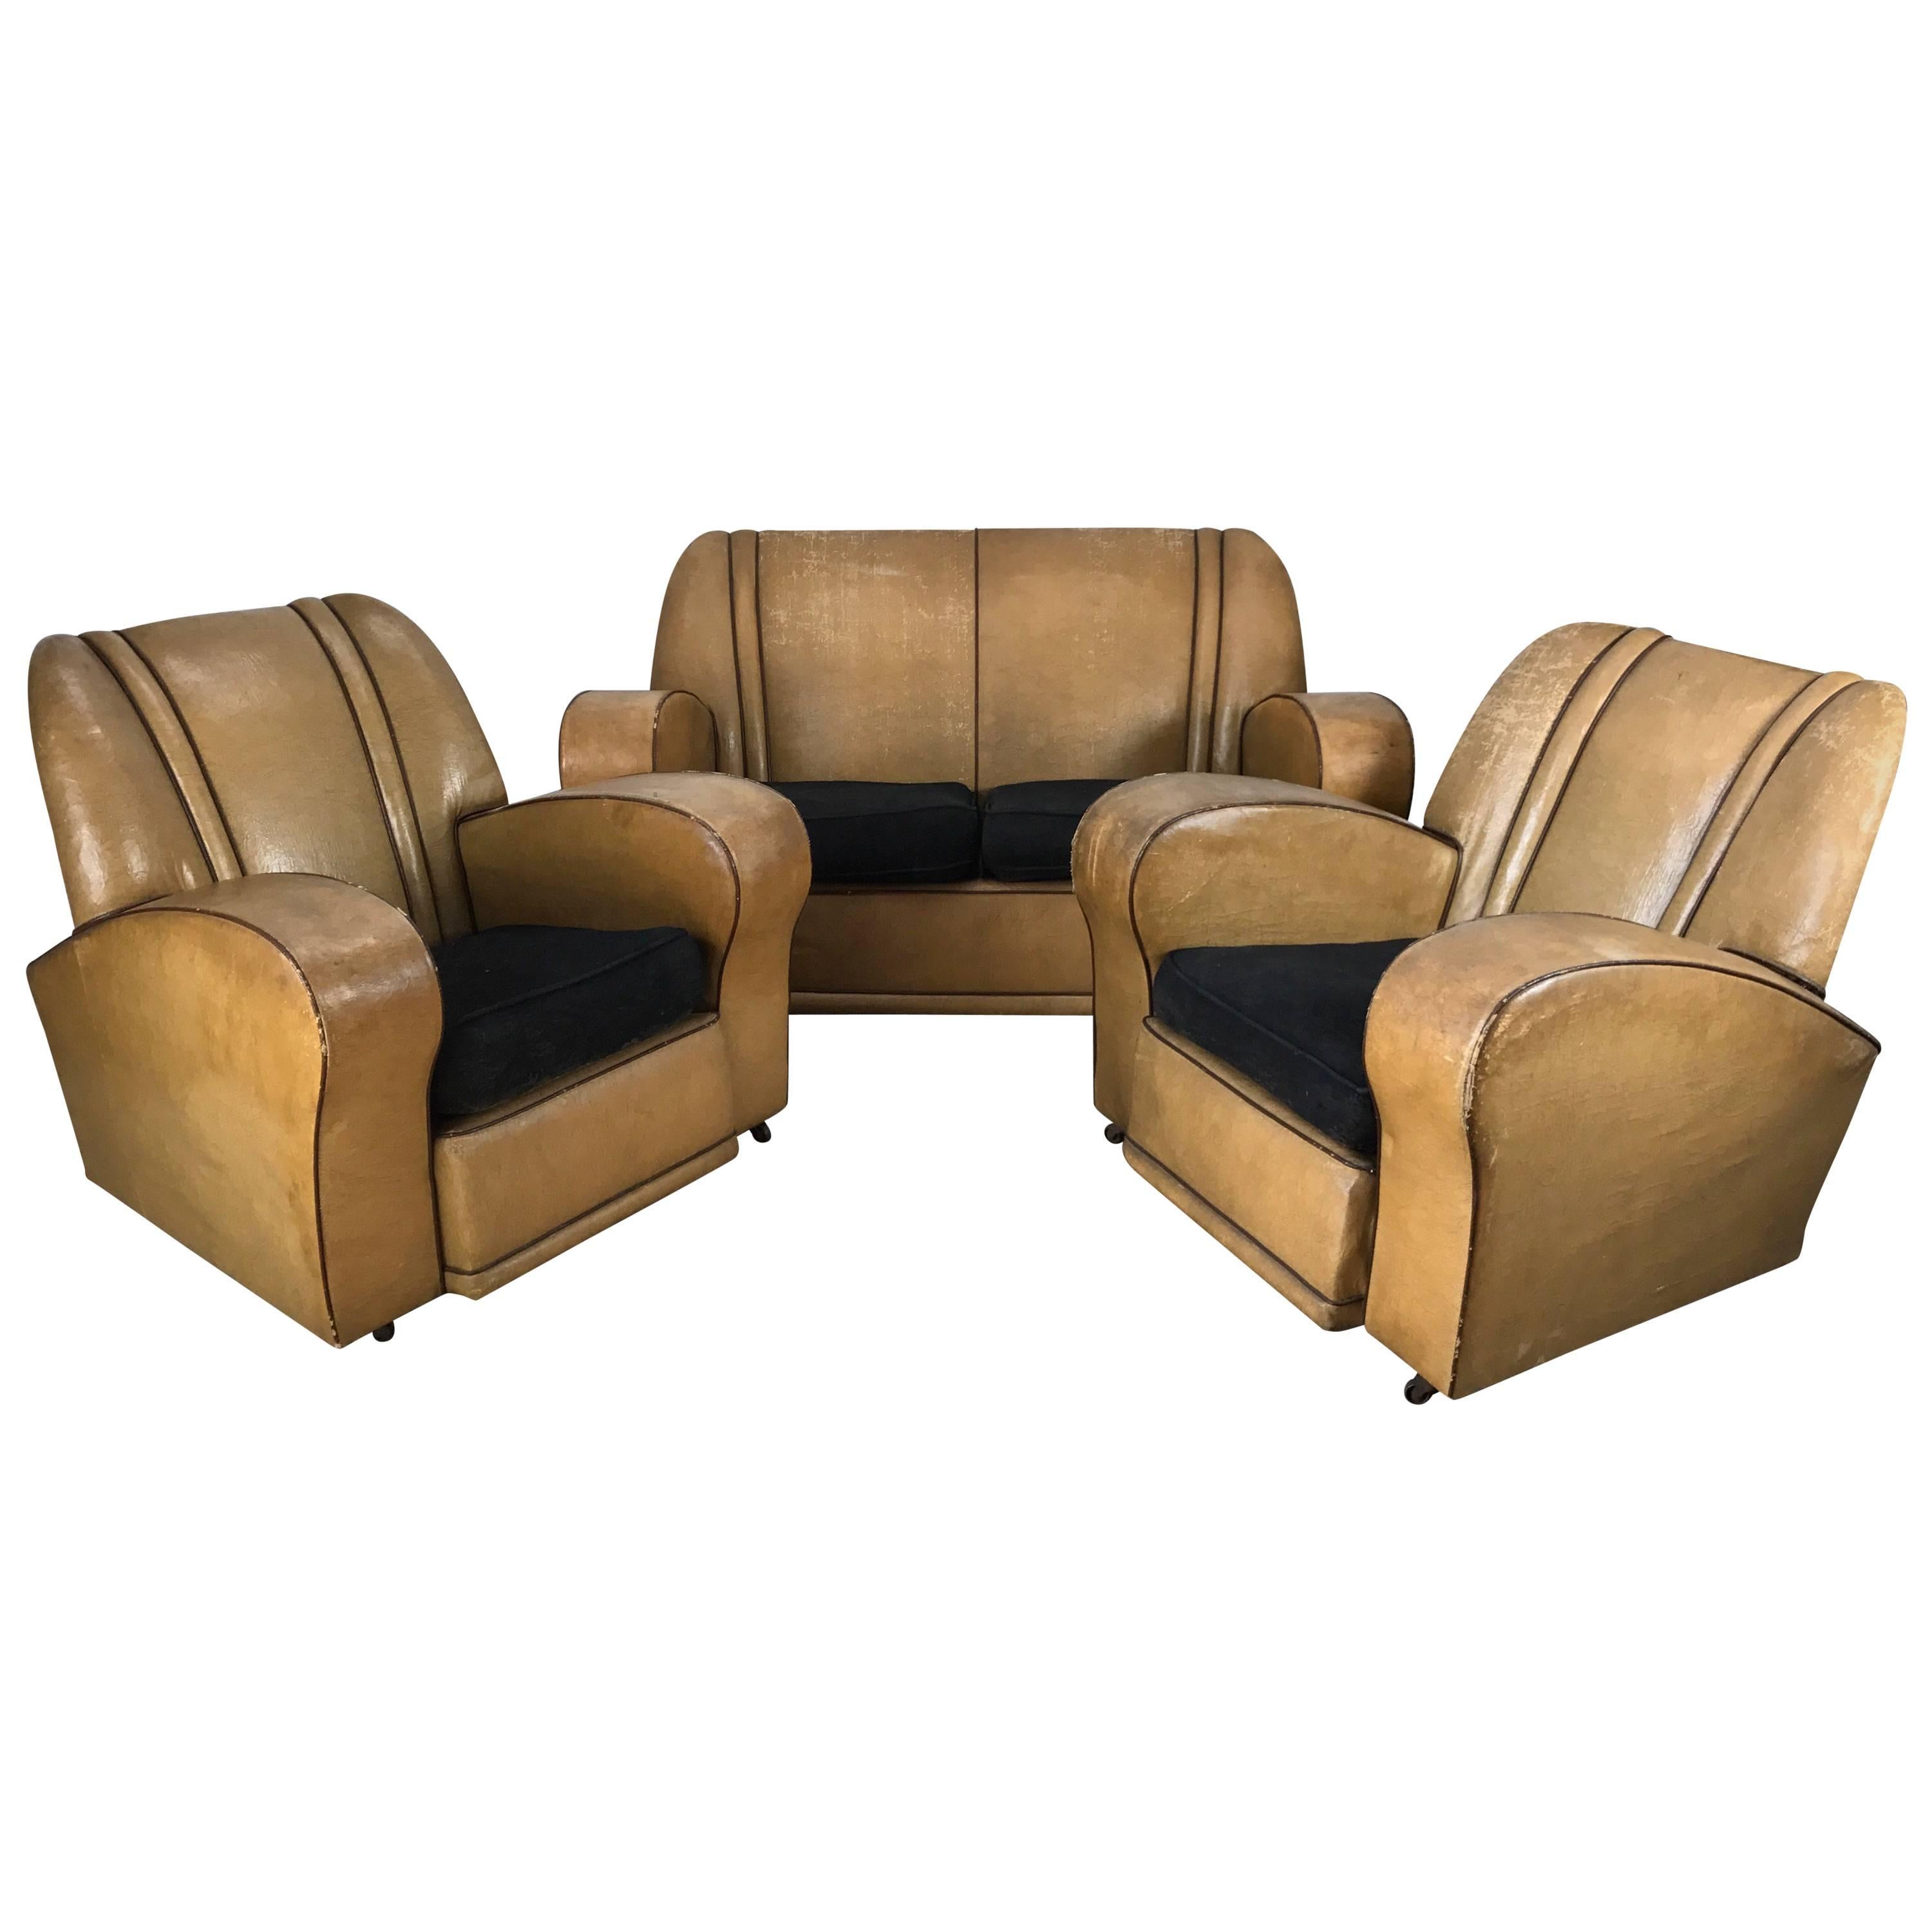 Three-Piece European Art Deco Suite, Matching Sofa and Club Chairs